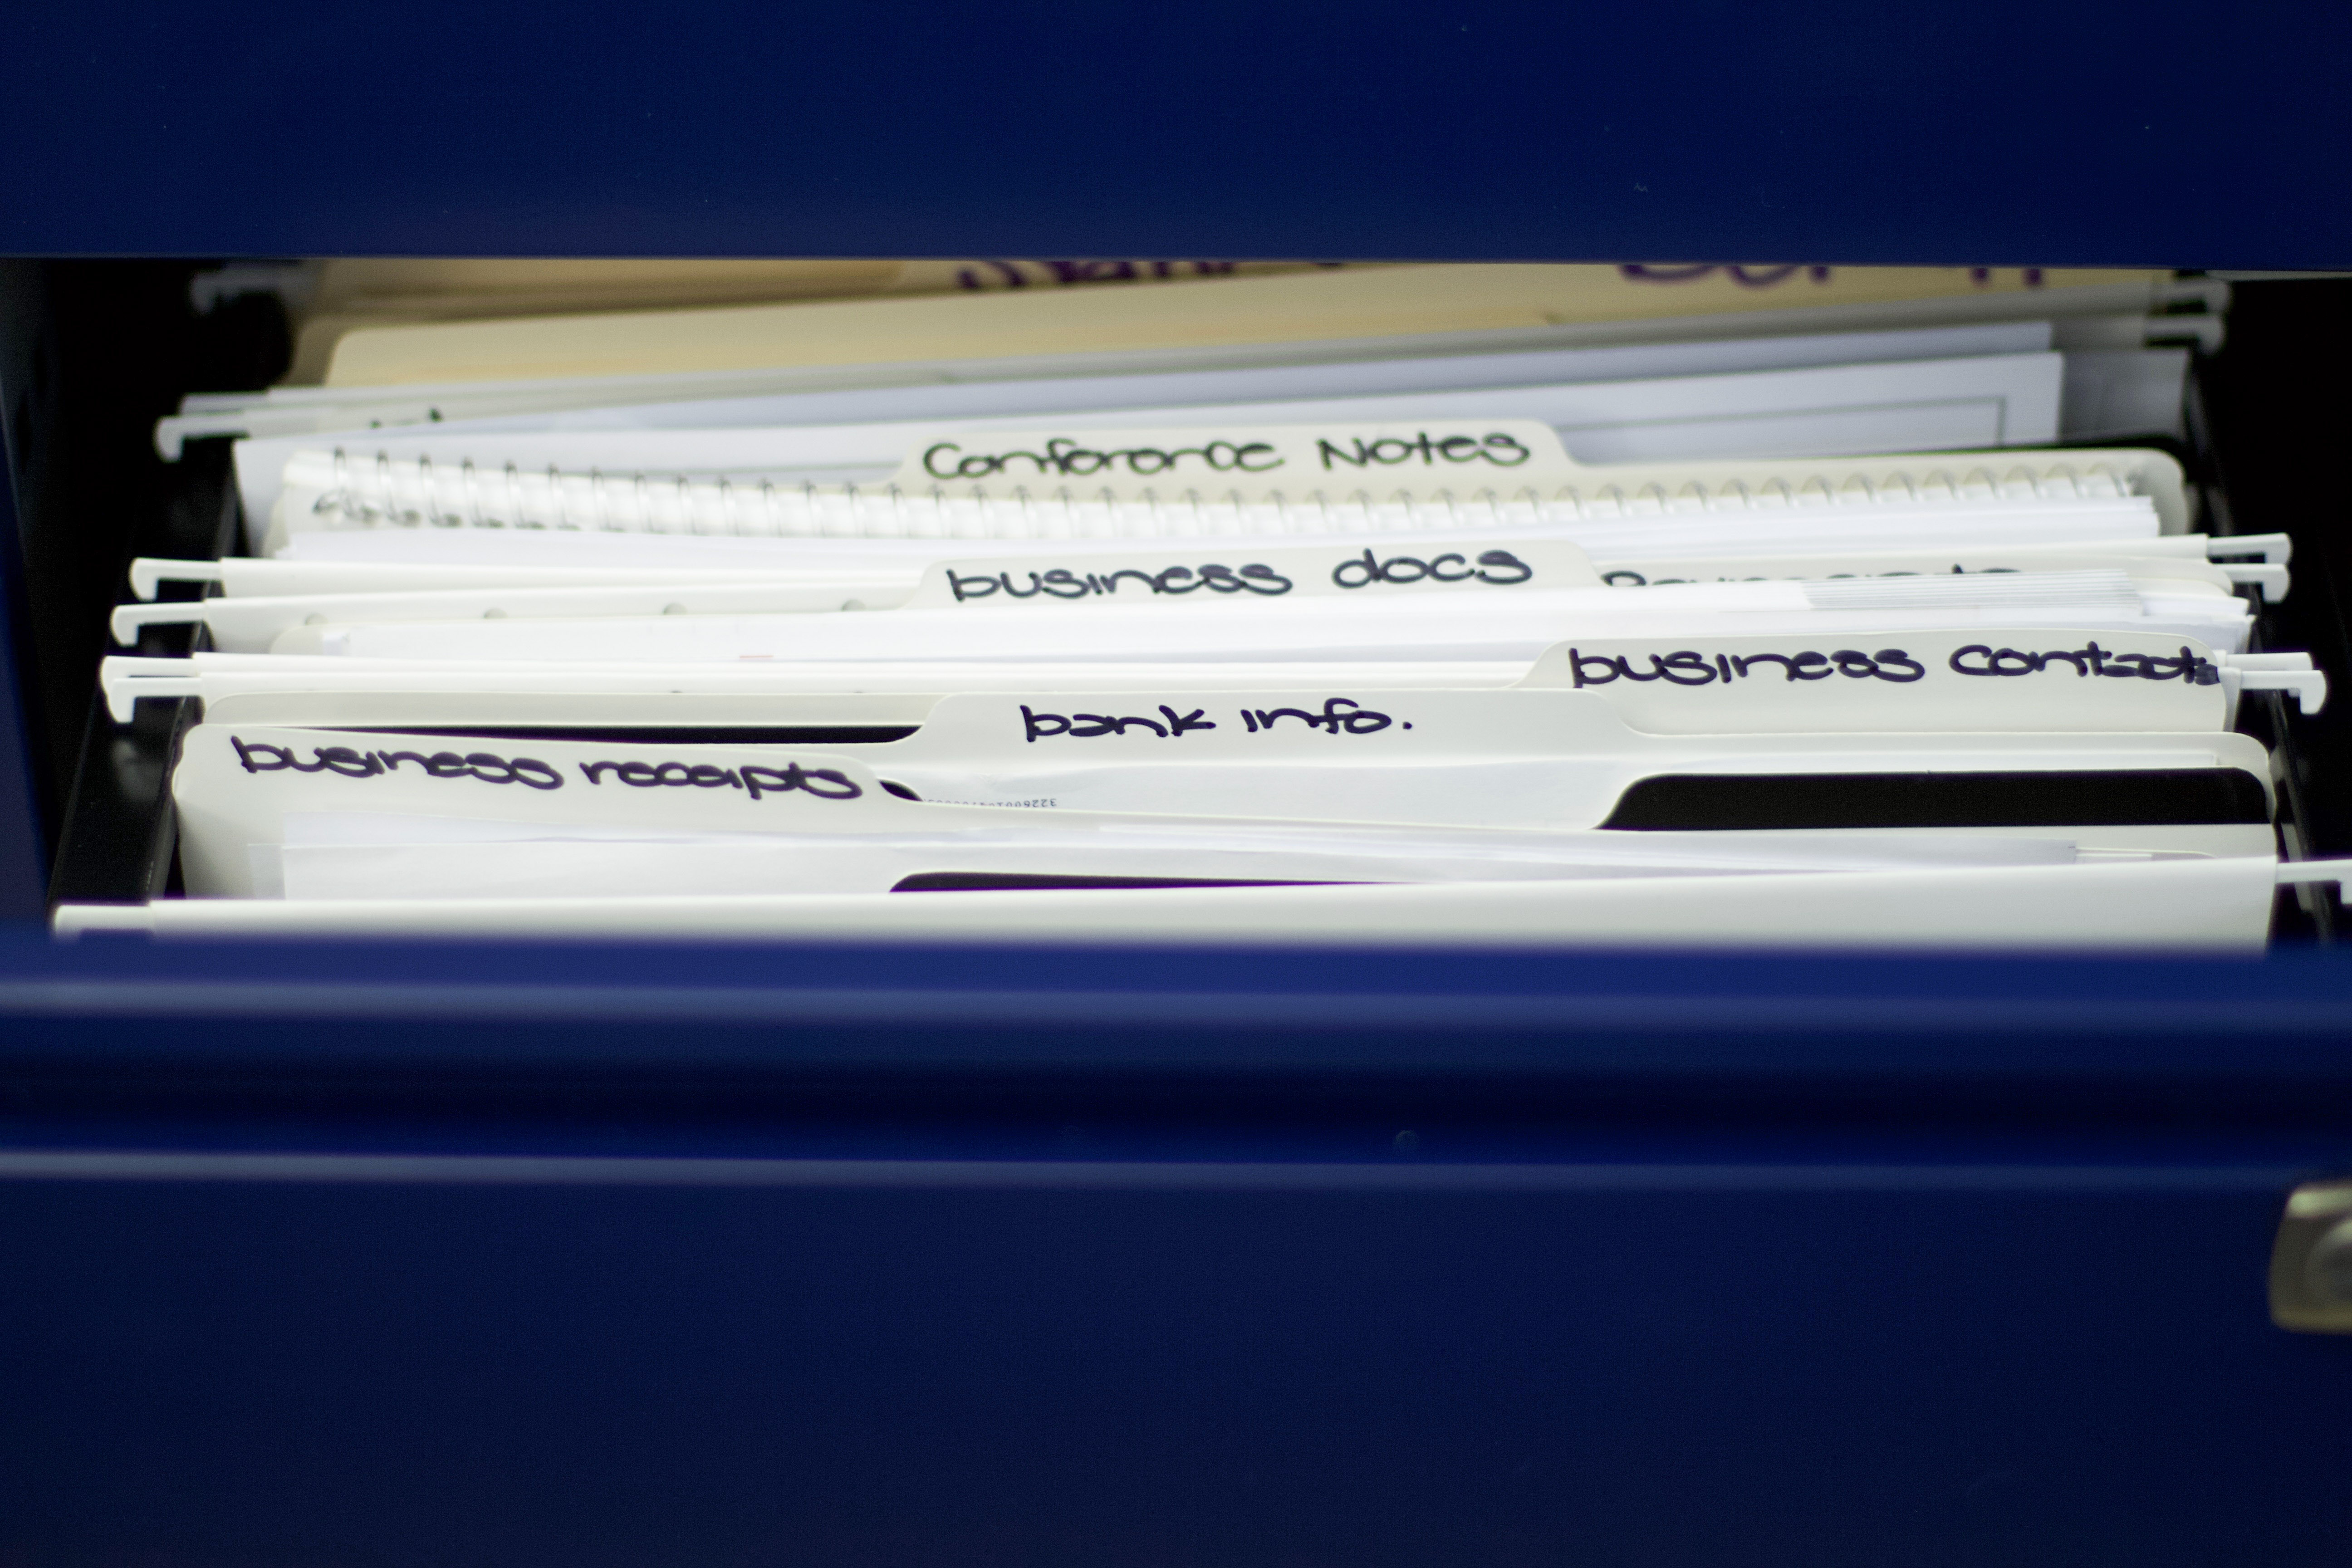 Filing cabinet with files labeled based on categories. #officeorganization